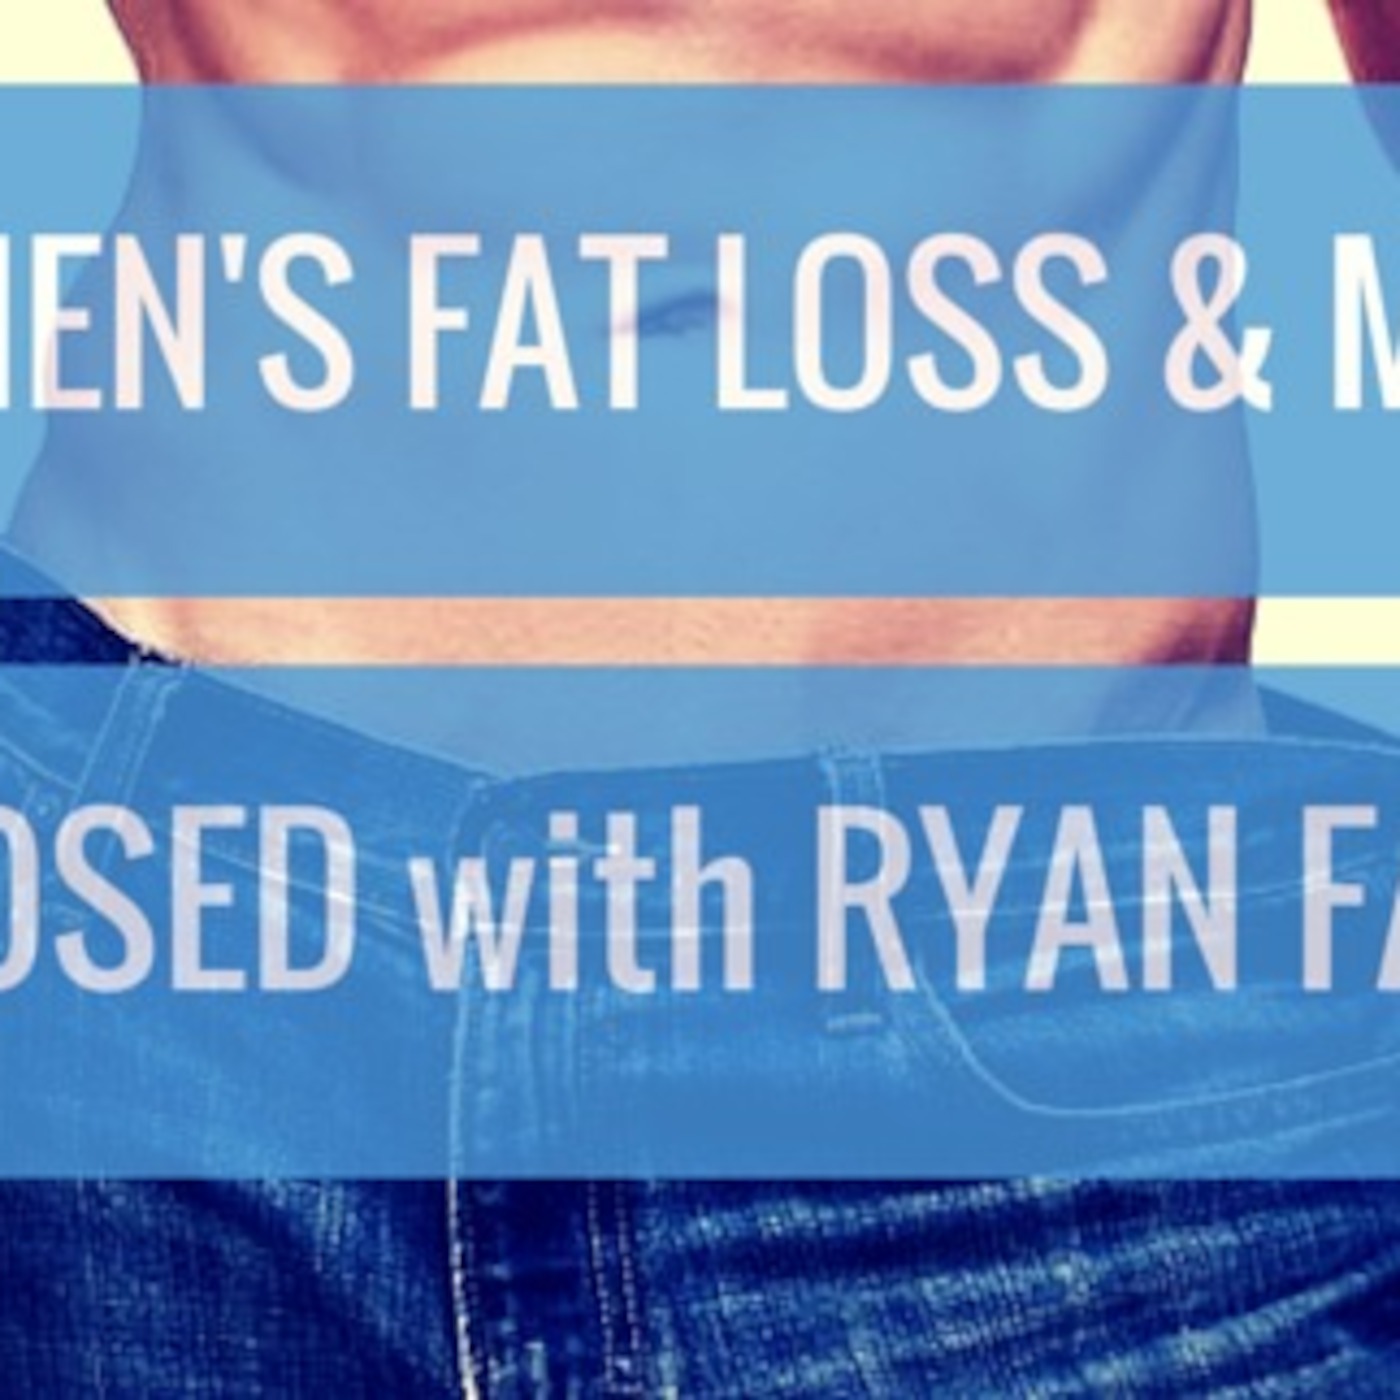 #28 Men’s Fat Loss and Muscle Exposed with Ryan Faehnle